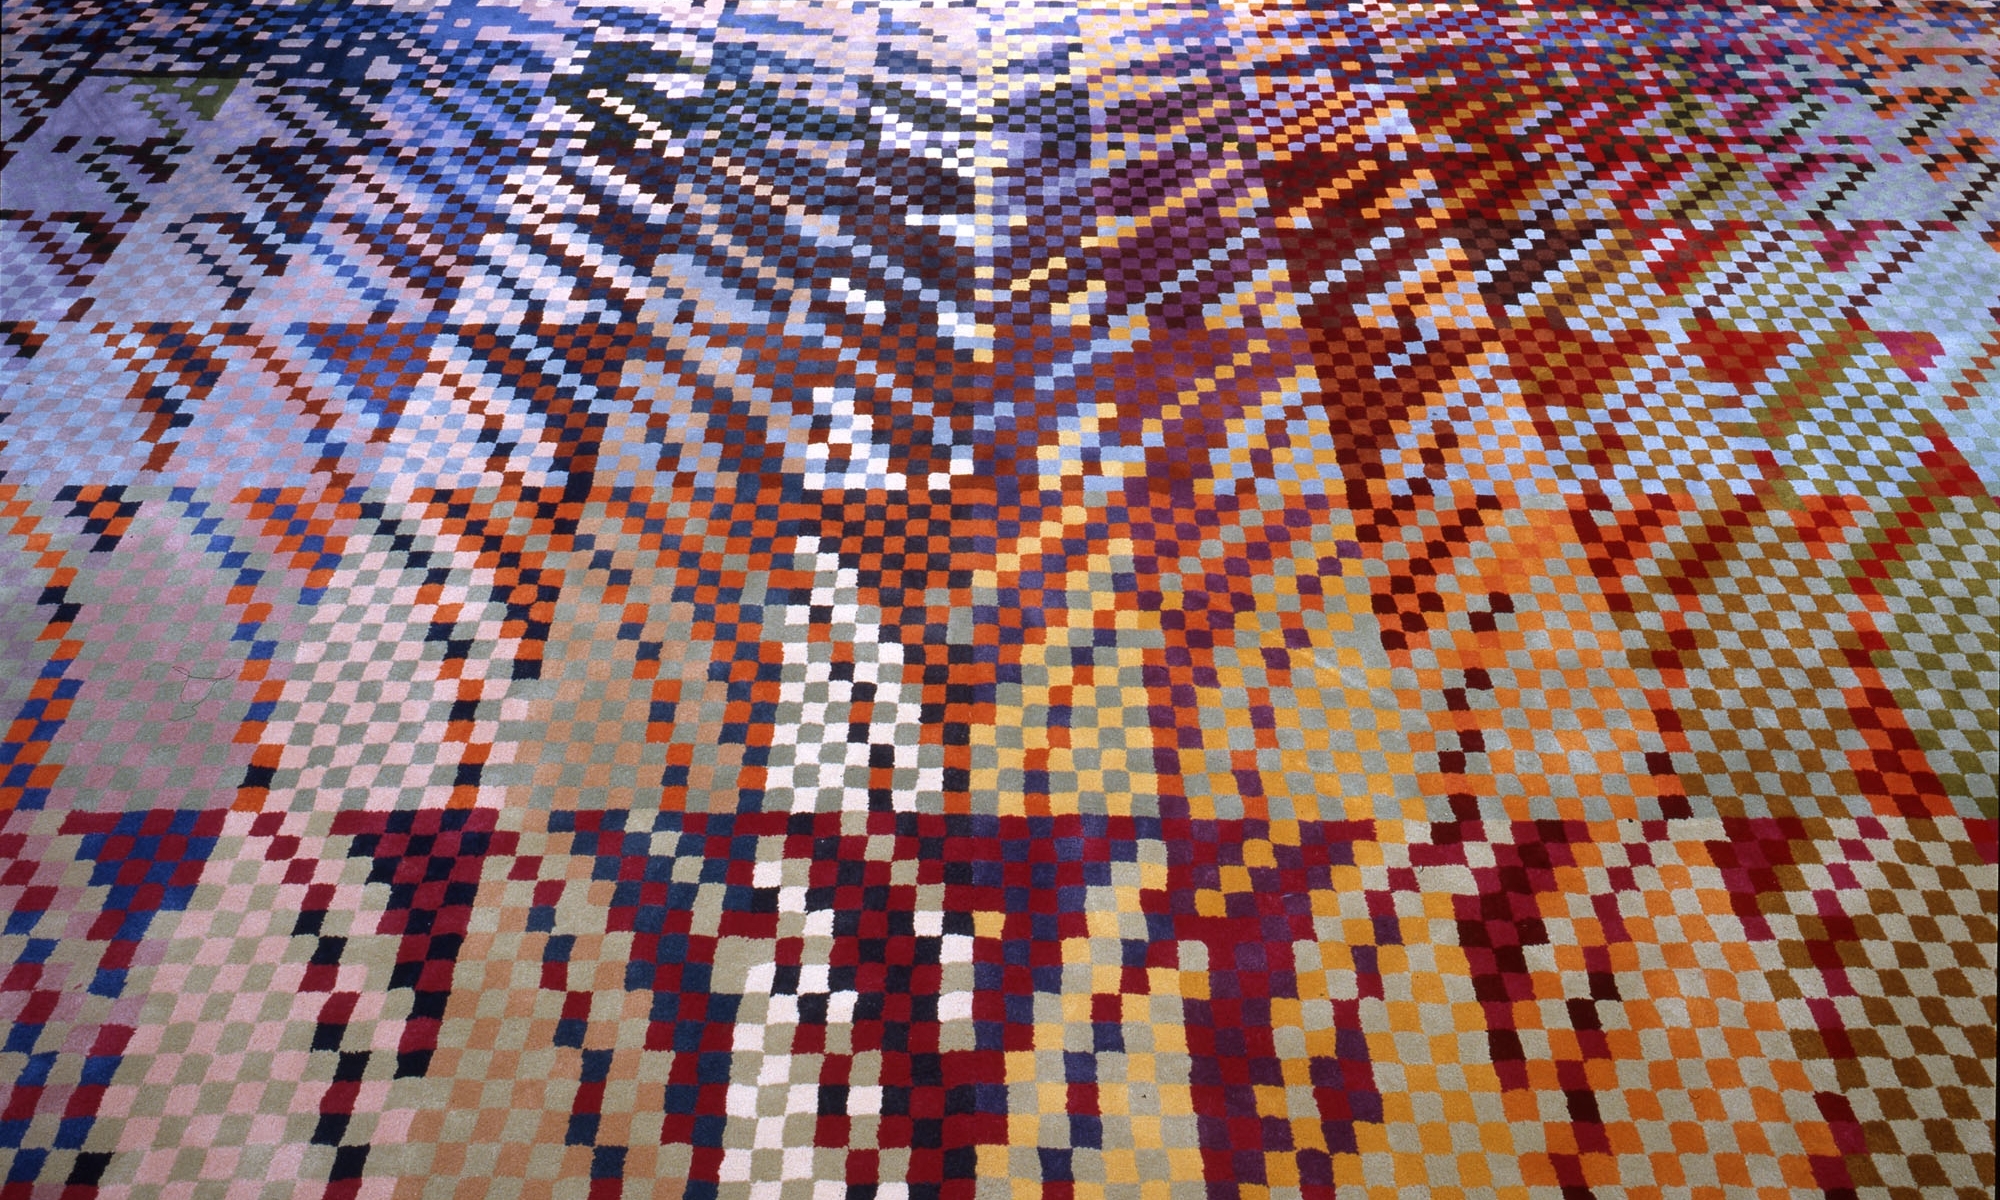 Carpet designed for the ministry of social services, detail